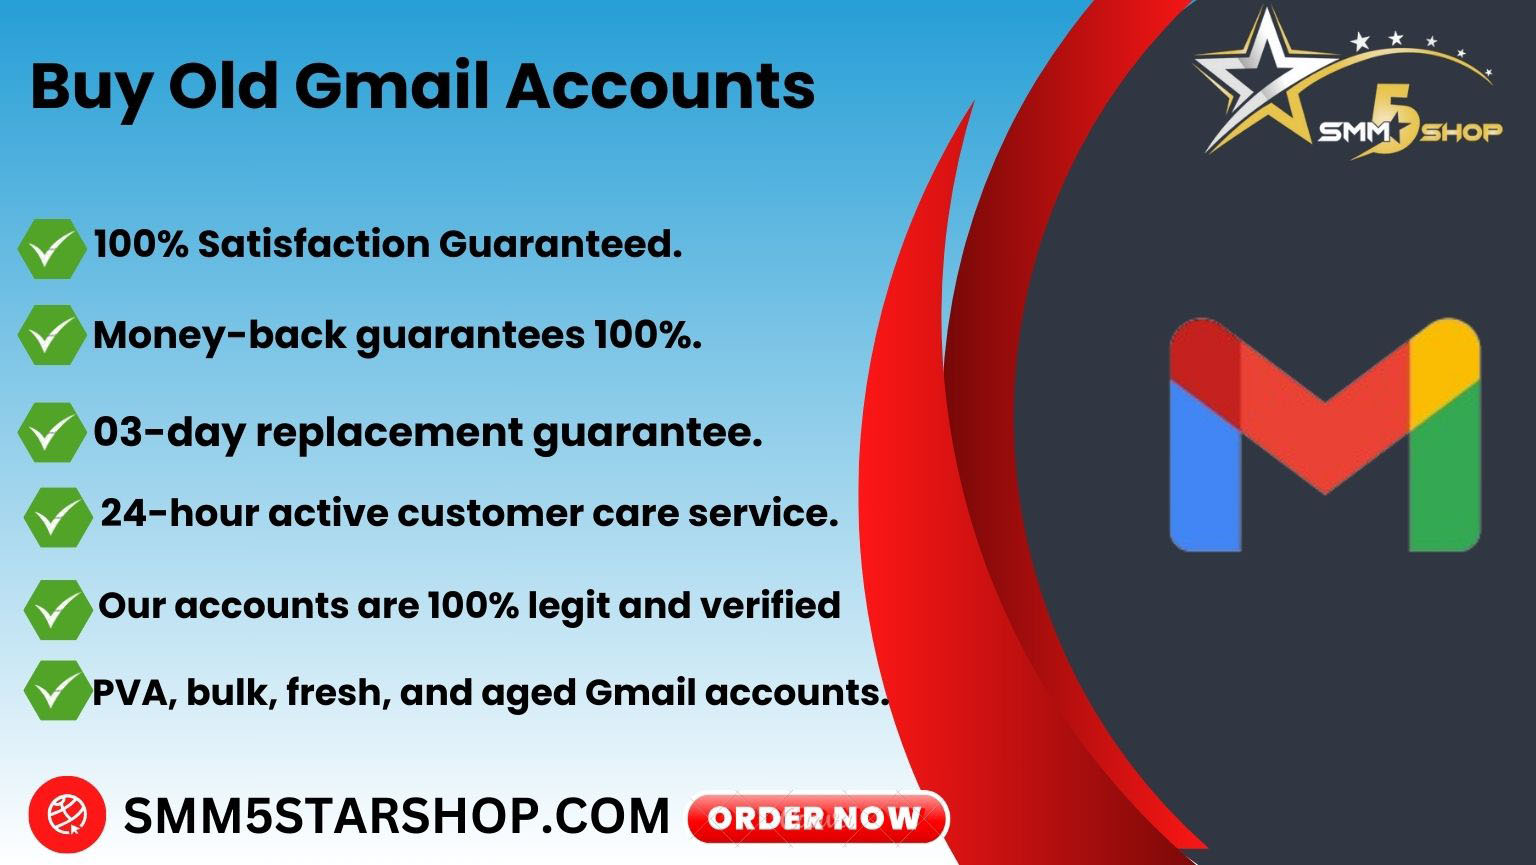  Buy old Gmail accounts